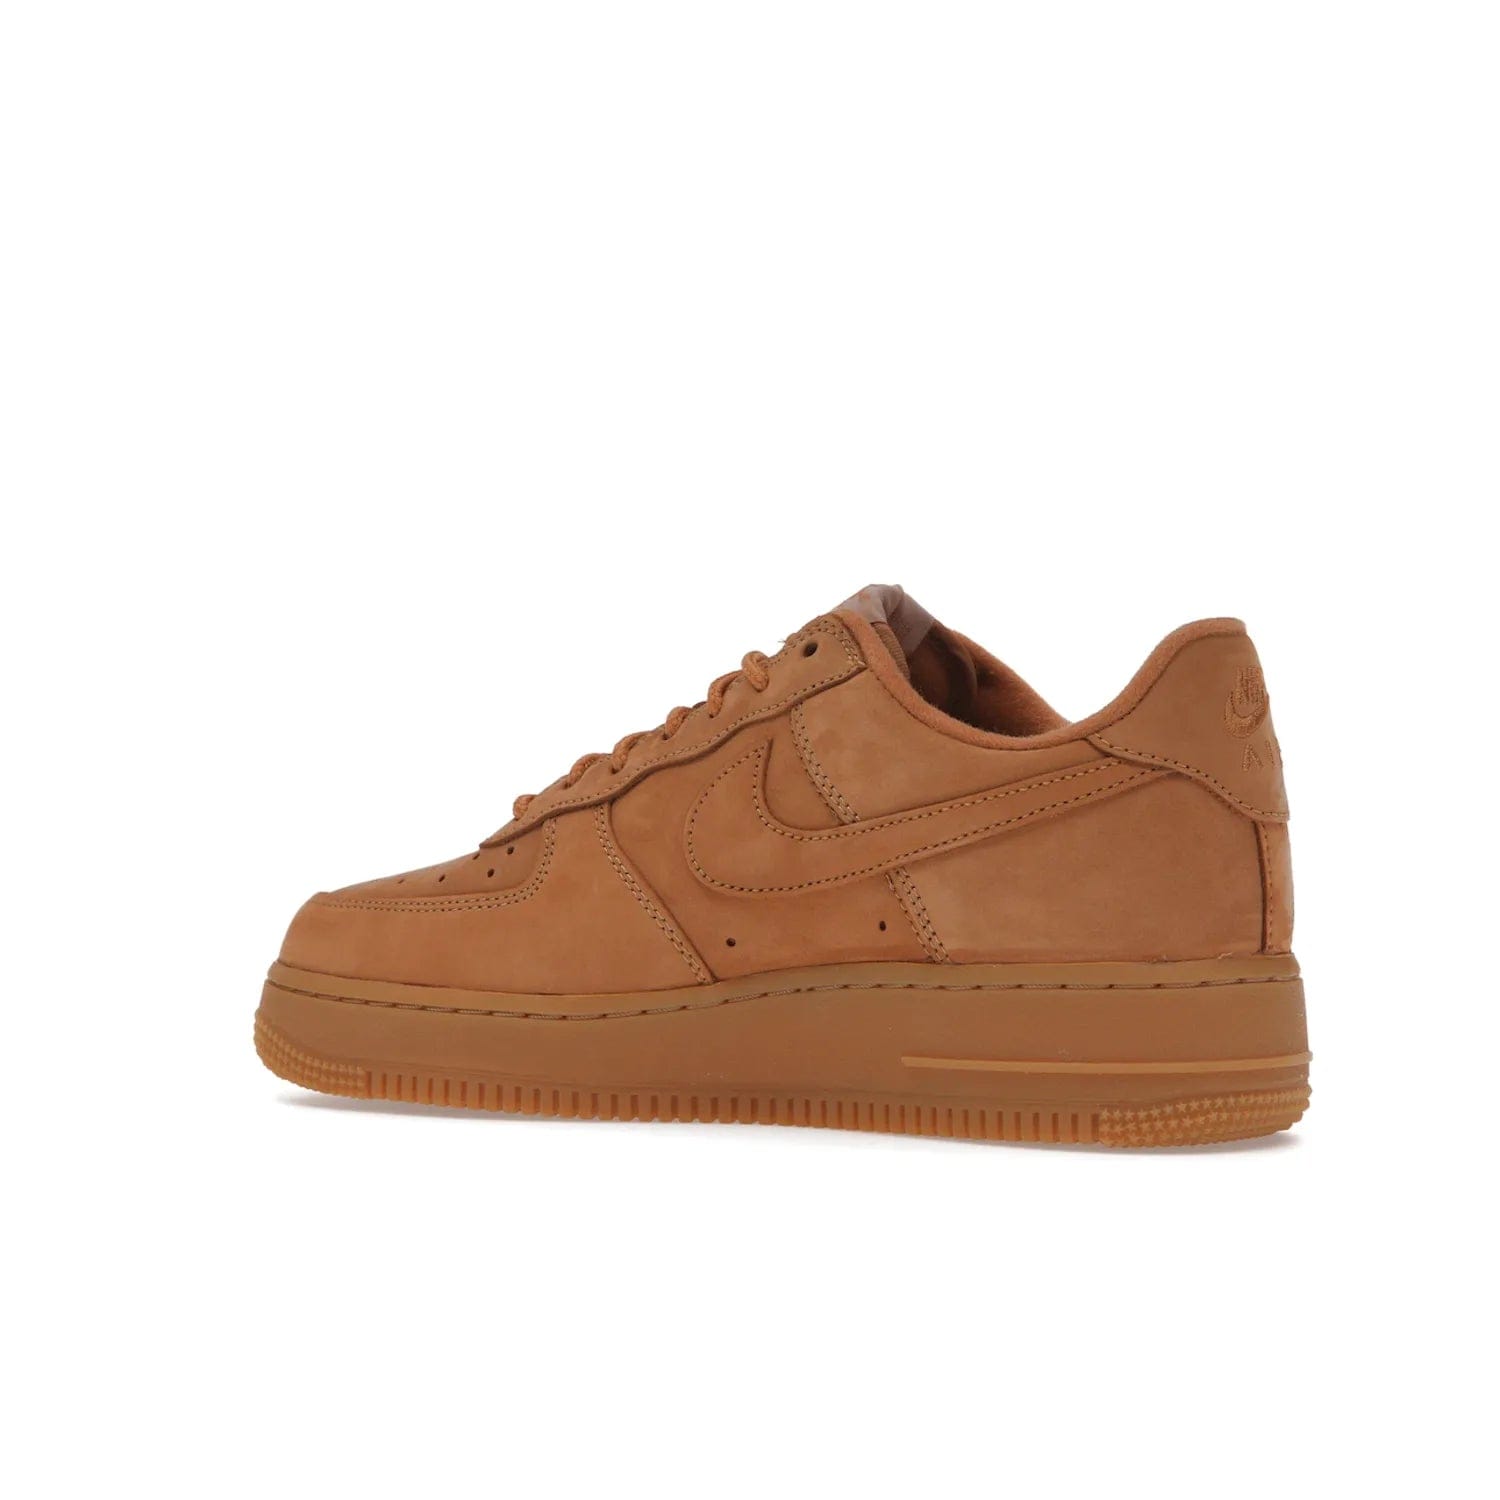 Nike Air Force 1 Low SP Supreme Wheat - Image 22 - Only at www.BallersClubKickz.com - A luxe Flax Durabuck upper and Supreme Box Logo insignias on the lateral heels make the Nike Air Force 1 Low SP Supreme Wheat a stylish lifestyle shoe. Matching Flax Air sole adds a classic touch to this collaboration between Nike and Supreme. Make a statement with this edition of the classic Air Force 1 Low.